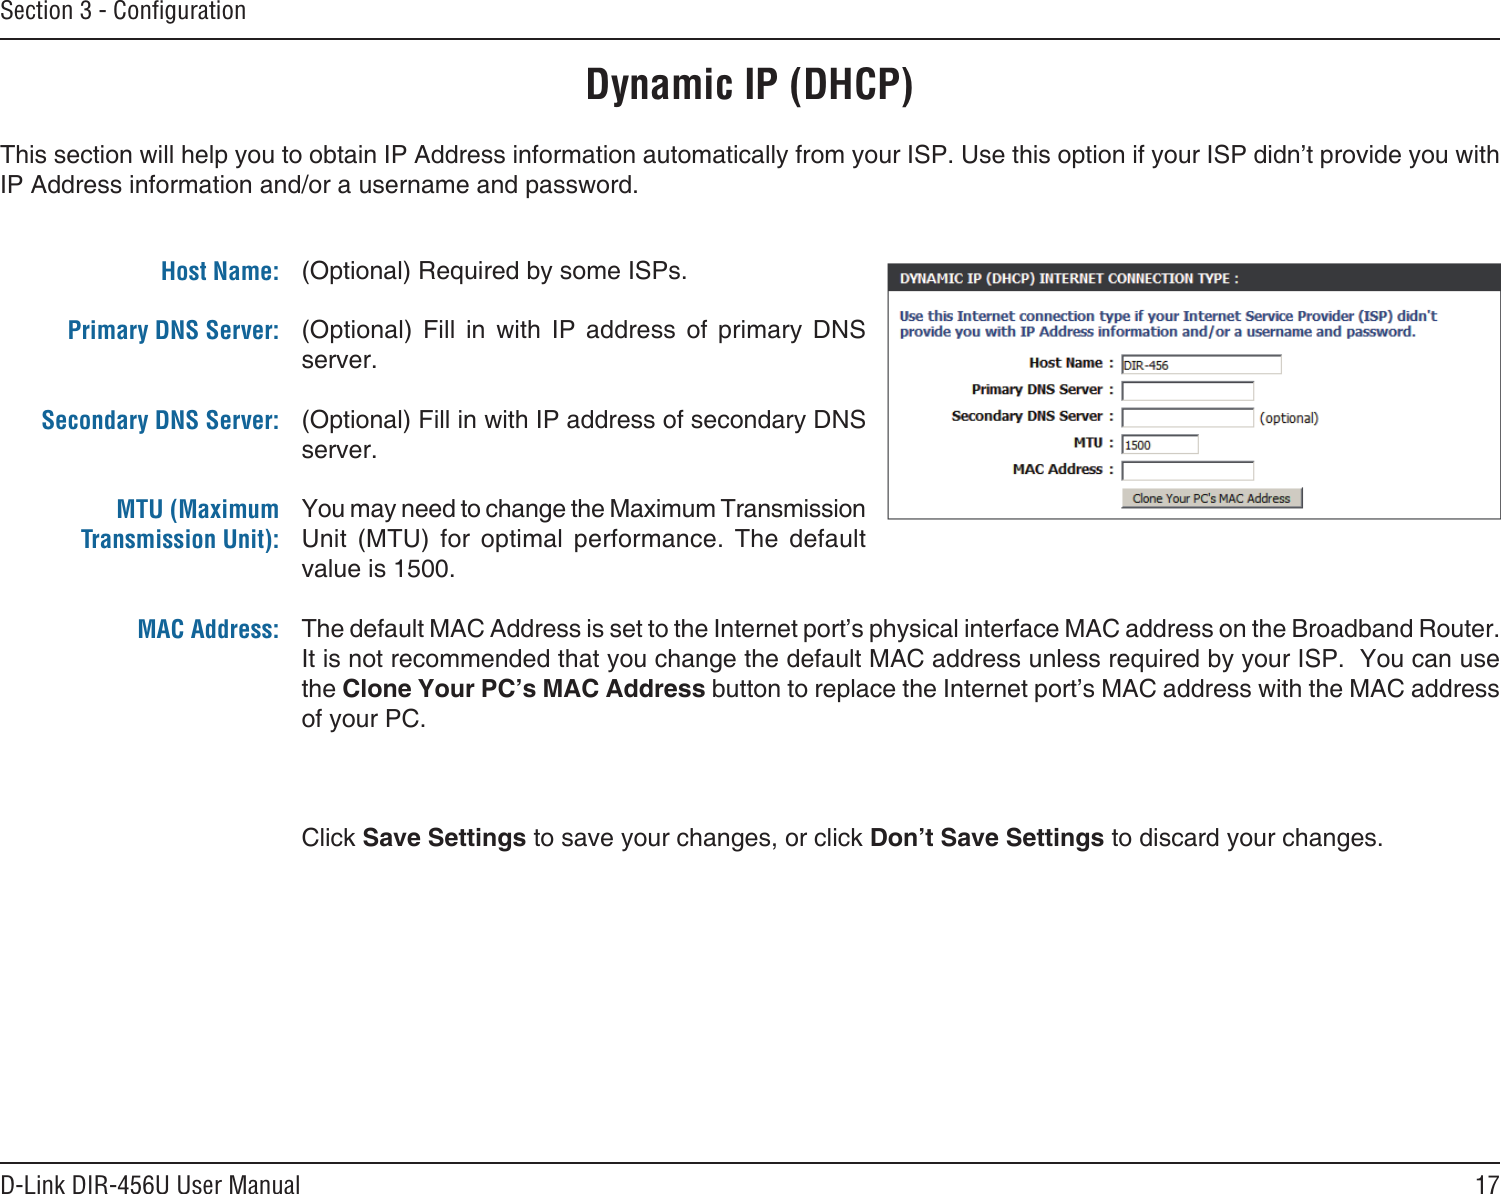 17D-Link DIR-456U User ManualSection 3 - ConﬁgurationDynamic IP (DHCP)(Optional) Required by some ISPs.(Optional)  Fill  in  with  IP  address  of  primary  DNS server.(Optional) Fill in with IP address of secondary DNS server.You may need to change the Maximum Transmission Unit  (MTU)  for  optimal  performance.  The  default value is 1500.The default MAC Address is set to the Internet port’s physical interface MAC address on the Broadband Router. It is not recommended that you change the default MAC address unless required by your ISP.  You can use the Clone Your PC’s MAC Address button to replace the Internet port’s MAC address with the MAC address of your PC.Click Save Settings to save your changes, or click Don’t Save Settings to discard your changes.This section will help you to obtain IP Address information automatically from your ISP. Use this option if your ISP didn’t provide you with IP Address information and/or a username and password.Host Name:Primary DNS Server: Secondary DNS Server: MTU (Maximum Transmission Unit): MAC Address: 